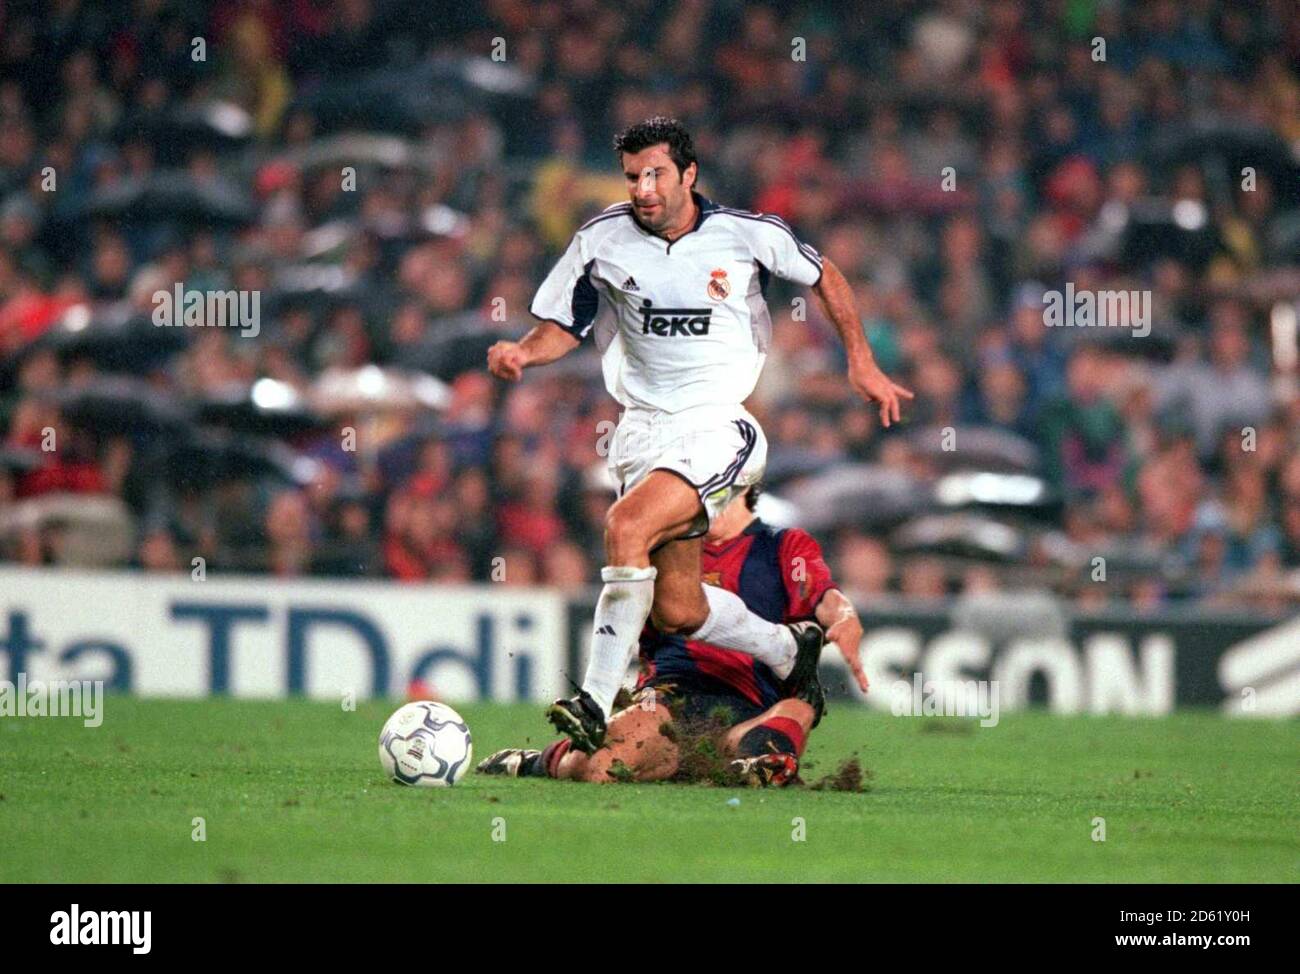 Barcelona's Carles Puyol (r) slides in on Real Madrid's Luis Figo (l) Stock Photo